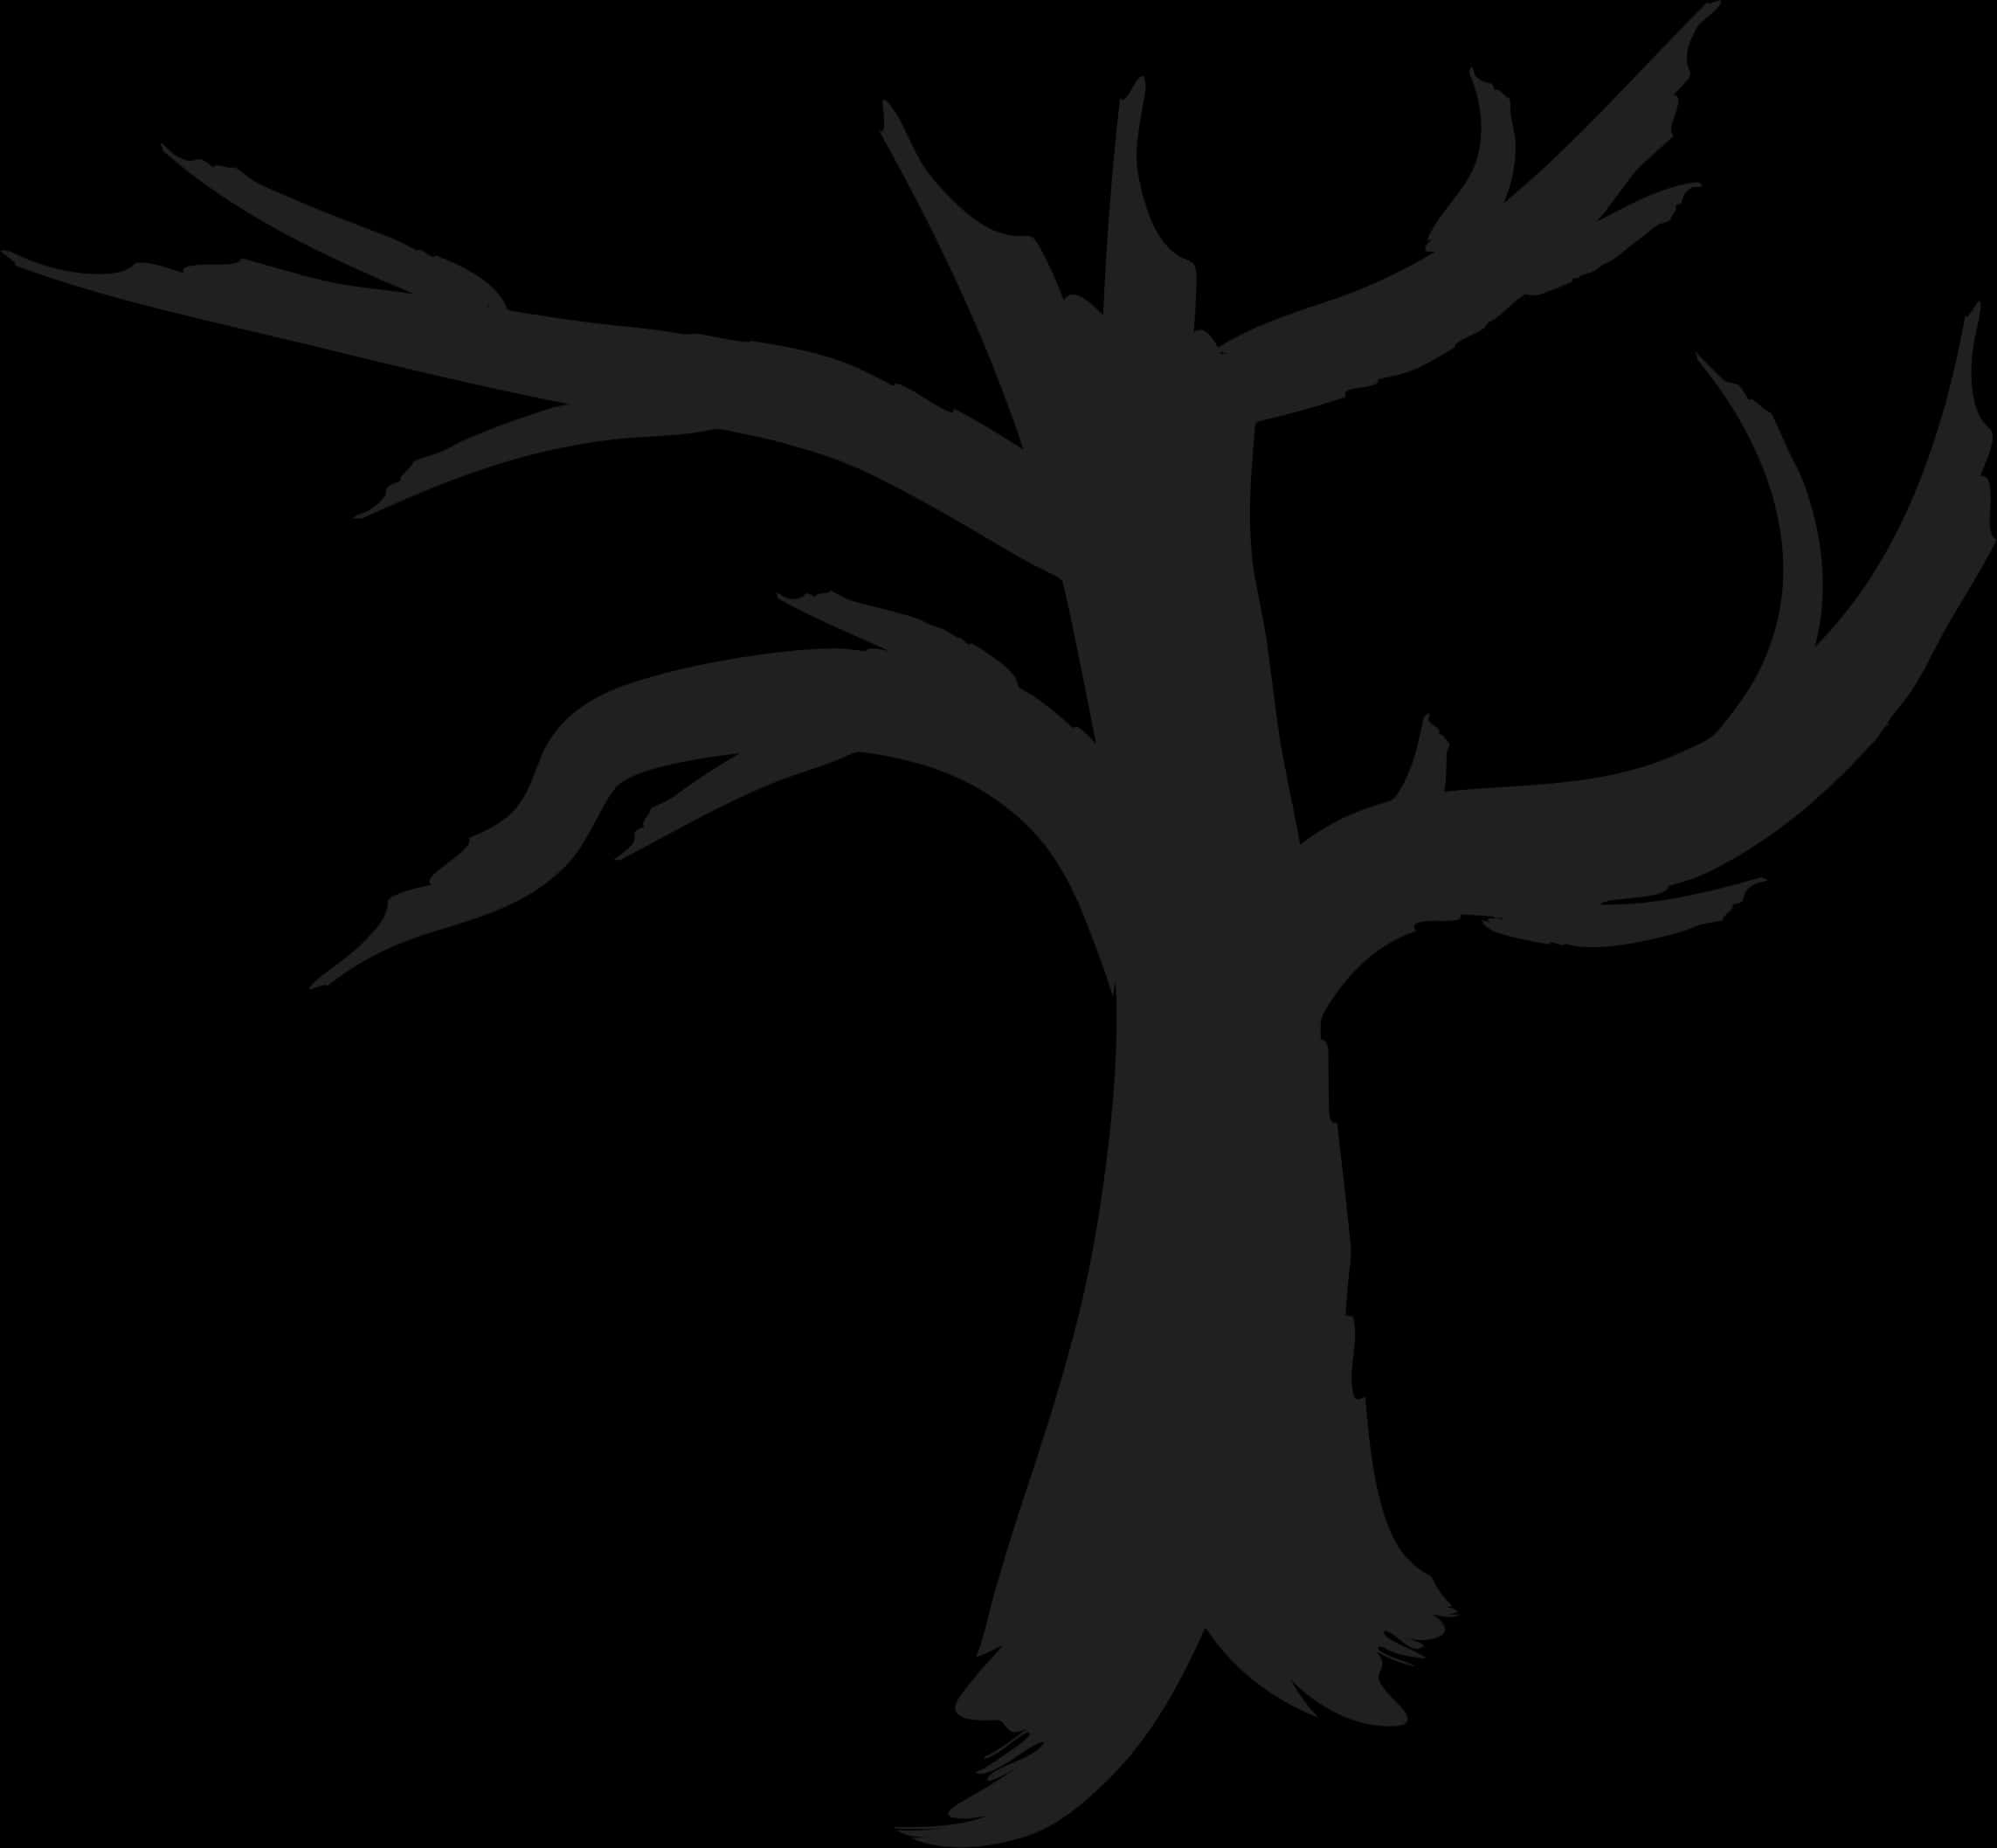 Bare Tree Silhouette Graphic PNG image